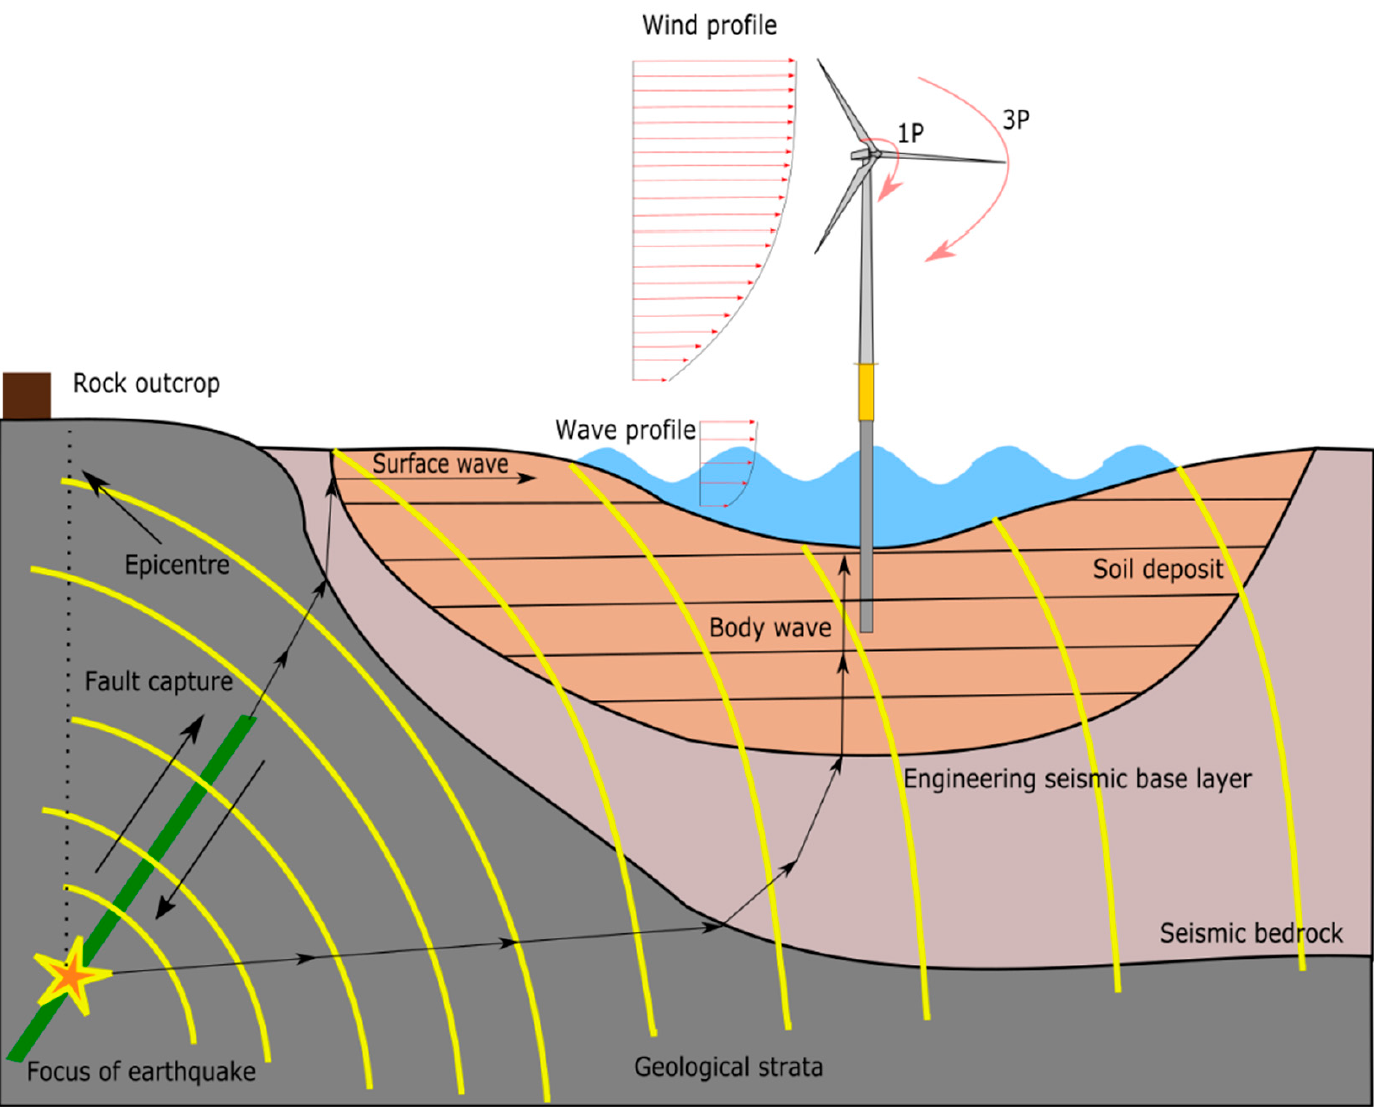 Figure 1. Schematic diagram of offshore wind turbines subjected to external forces in the seismic zone (Bhattacharya et al., 2021*)